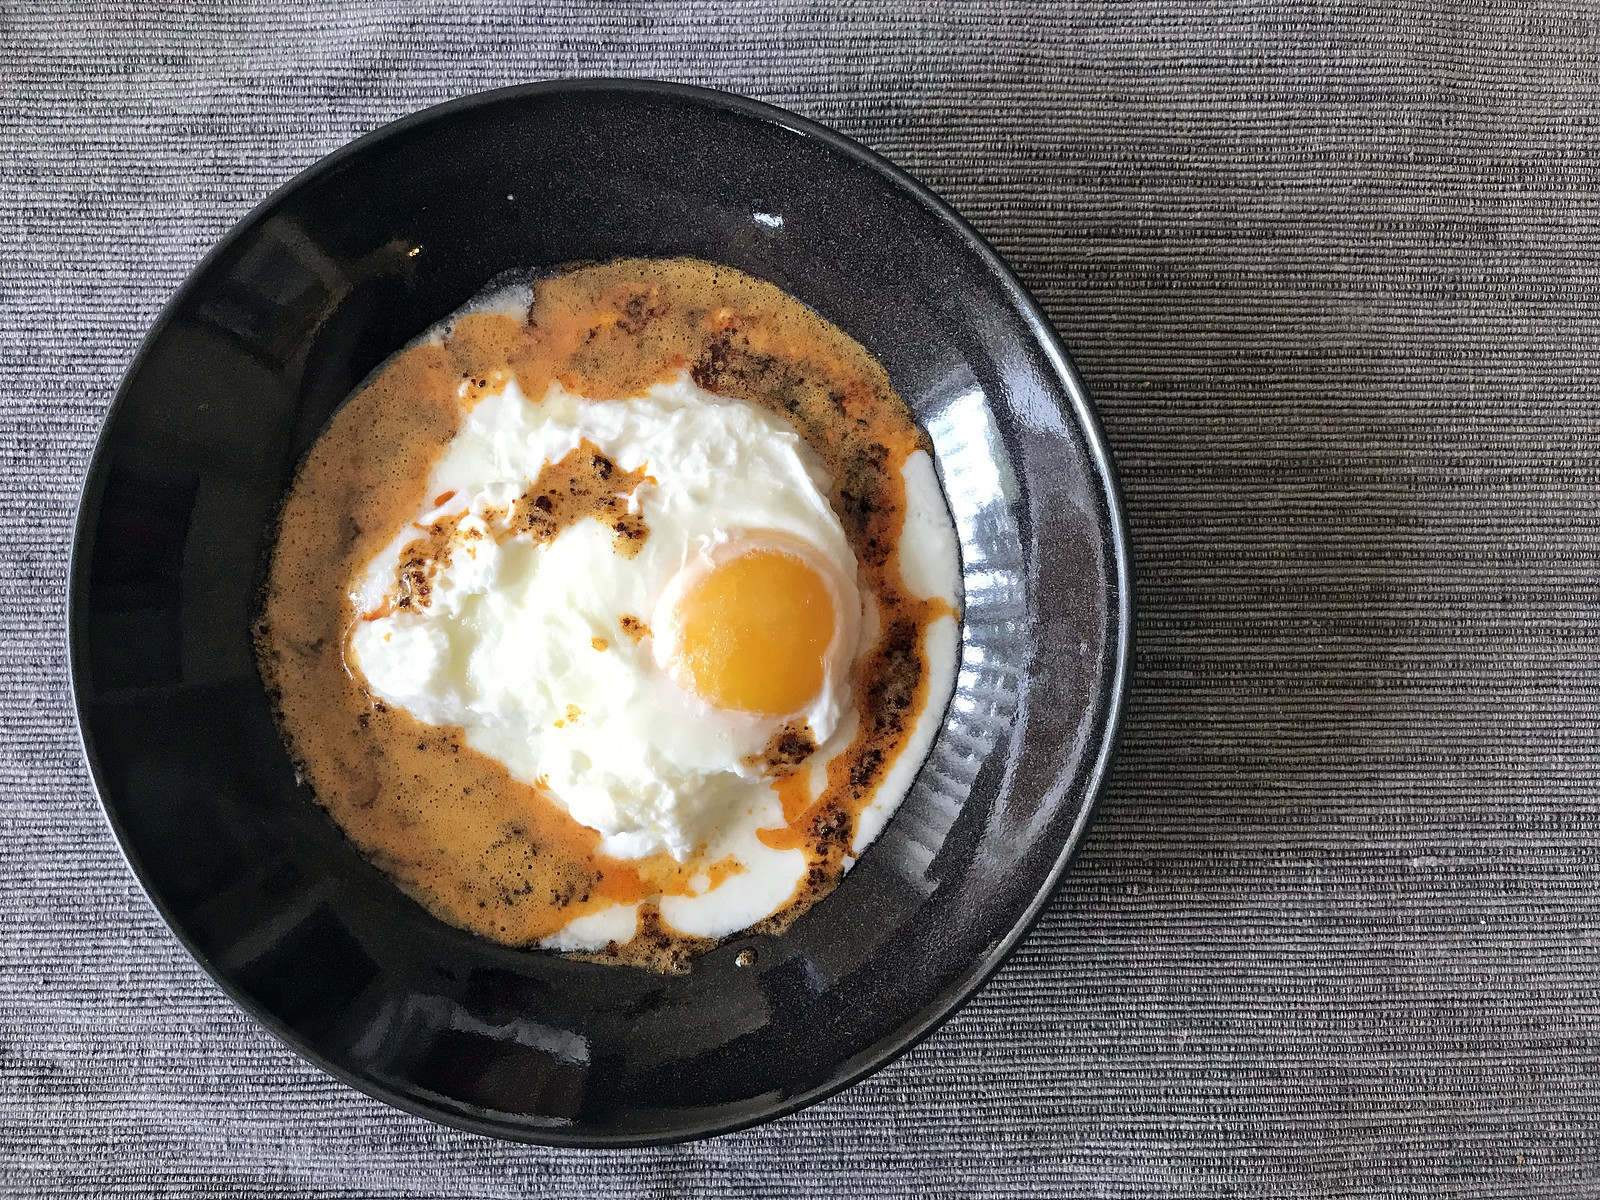 Turkish-style poached eggs